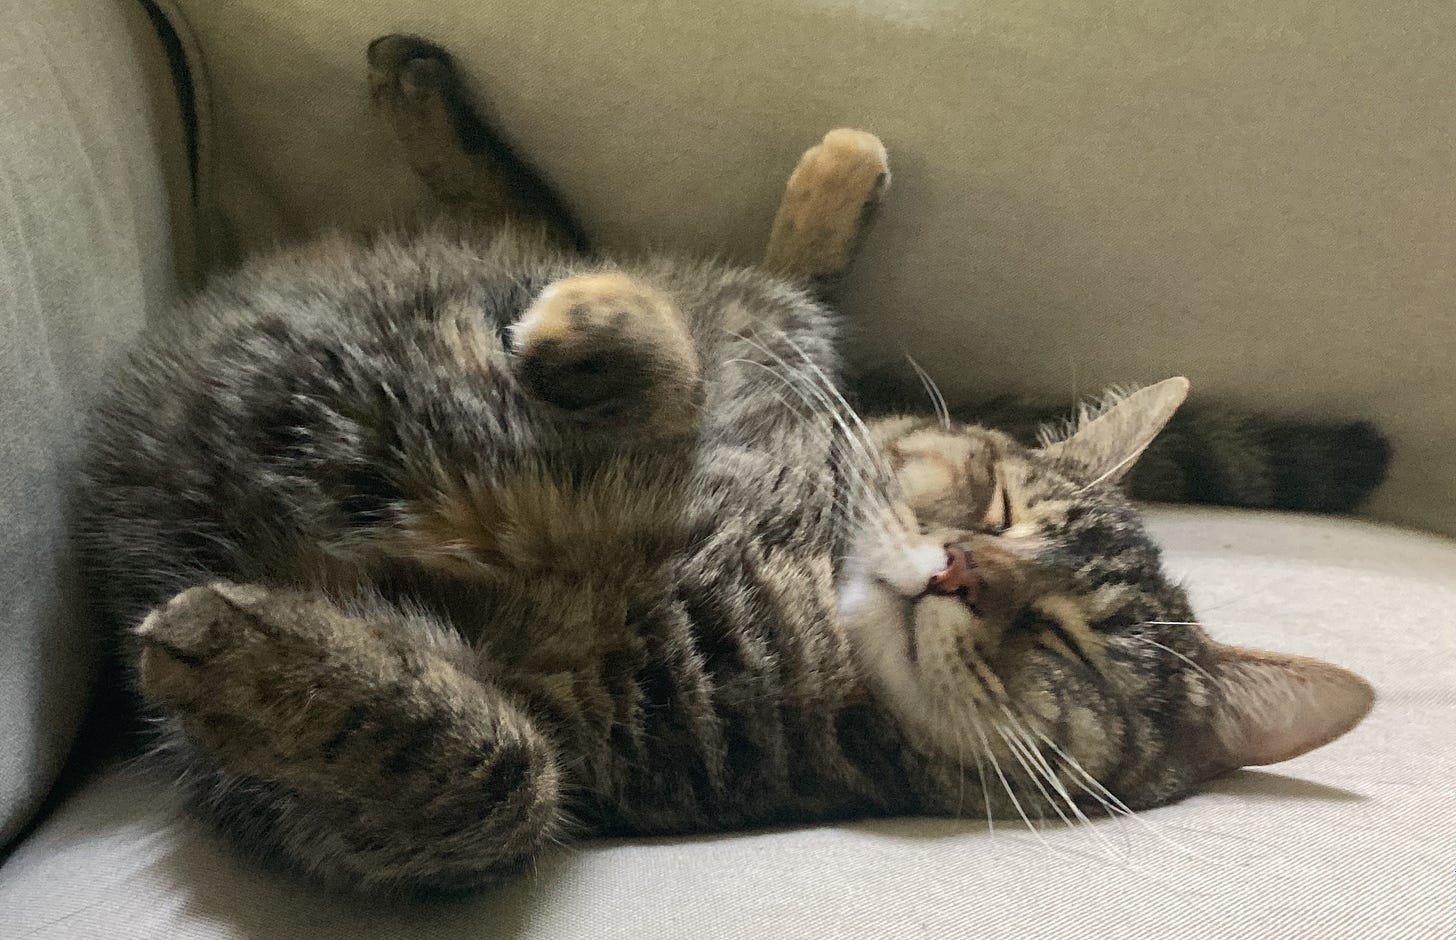 a tabby cat lies on a canvas couch, with front paws pointing forward and hind paws straight up in the air. her eyes are squeezed tight.